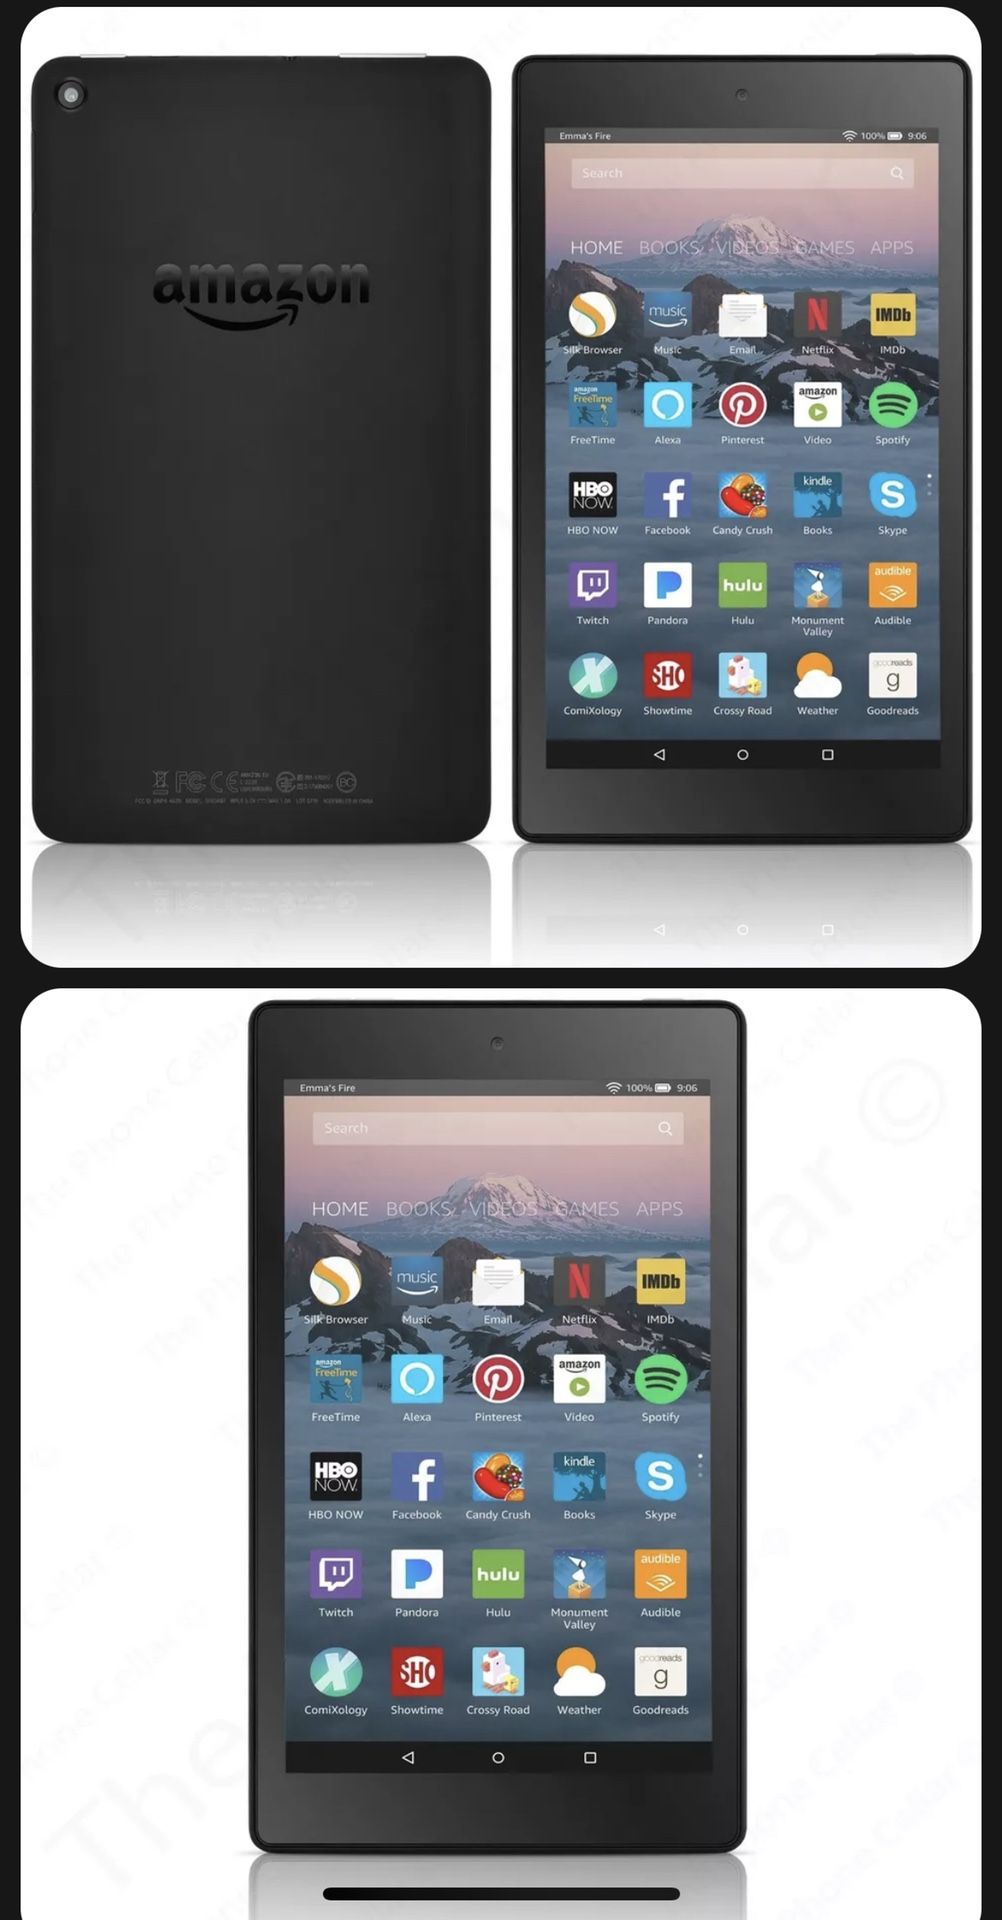 Amazon Fire Android Tablet 8"